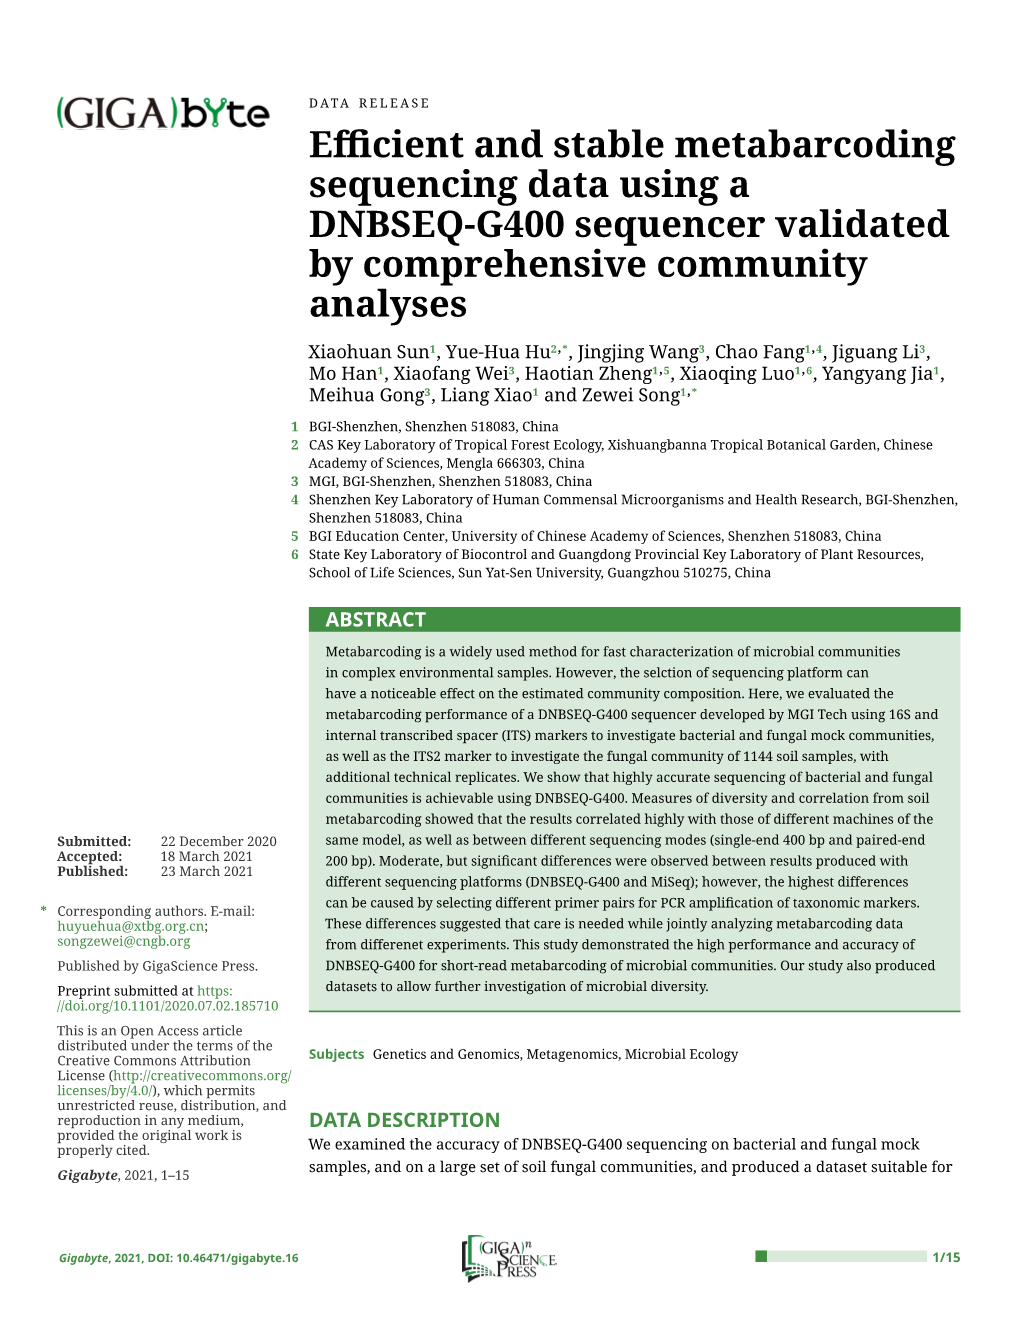 Efficient and Stable Metabarcoding Sequencing Data Using a DNBSEQ-G400 Sequencer Validated by Comprehensive Community Analyses